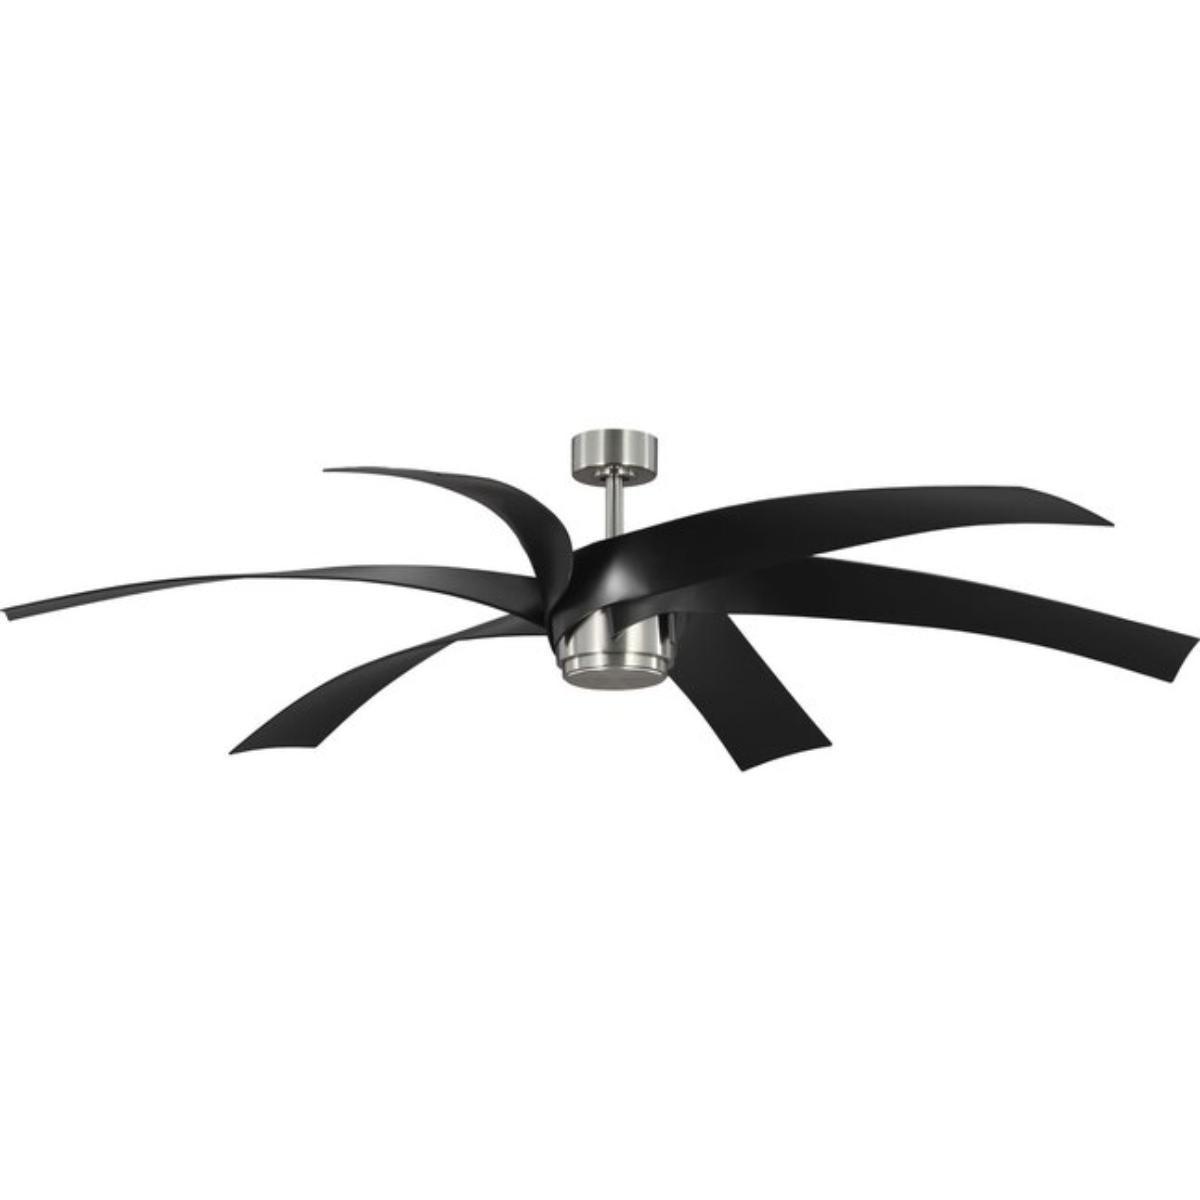 Insigna 72 Inch LED Ceiling Fan with Light Kit and Remote, Brushed Nickel with Matte Black Blades - Bees Lighting